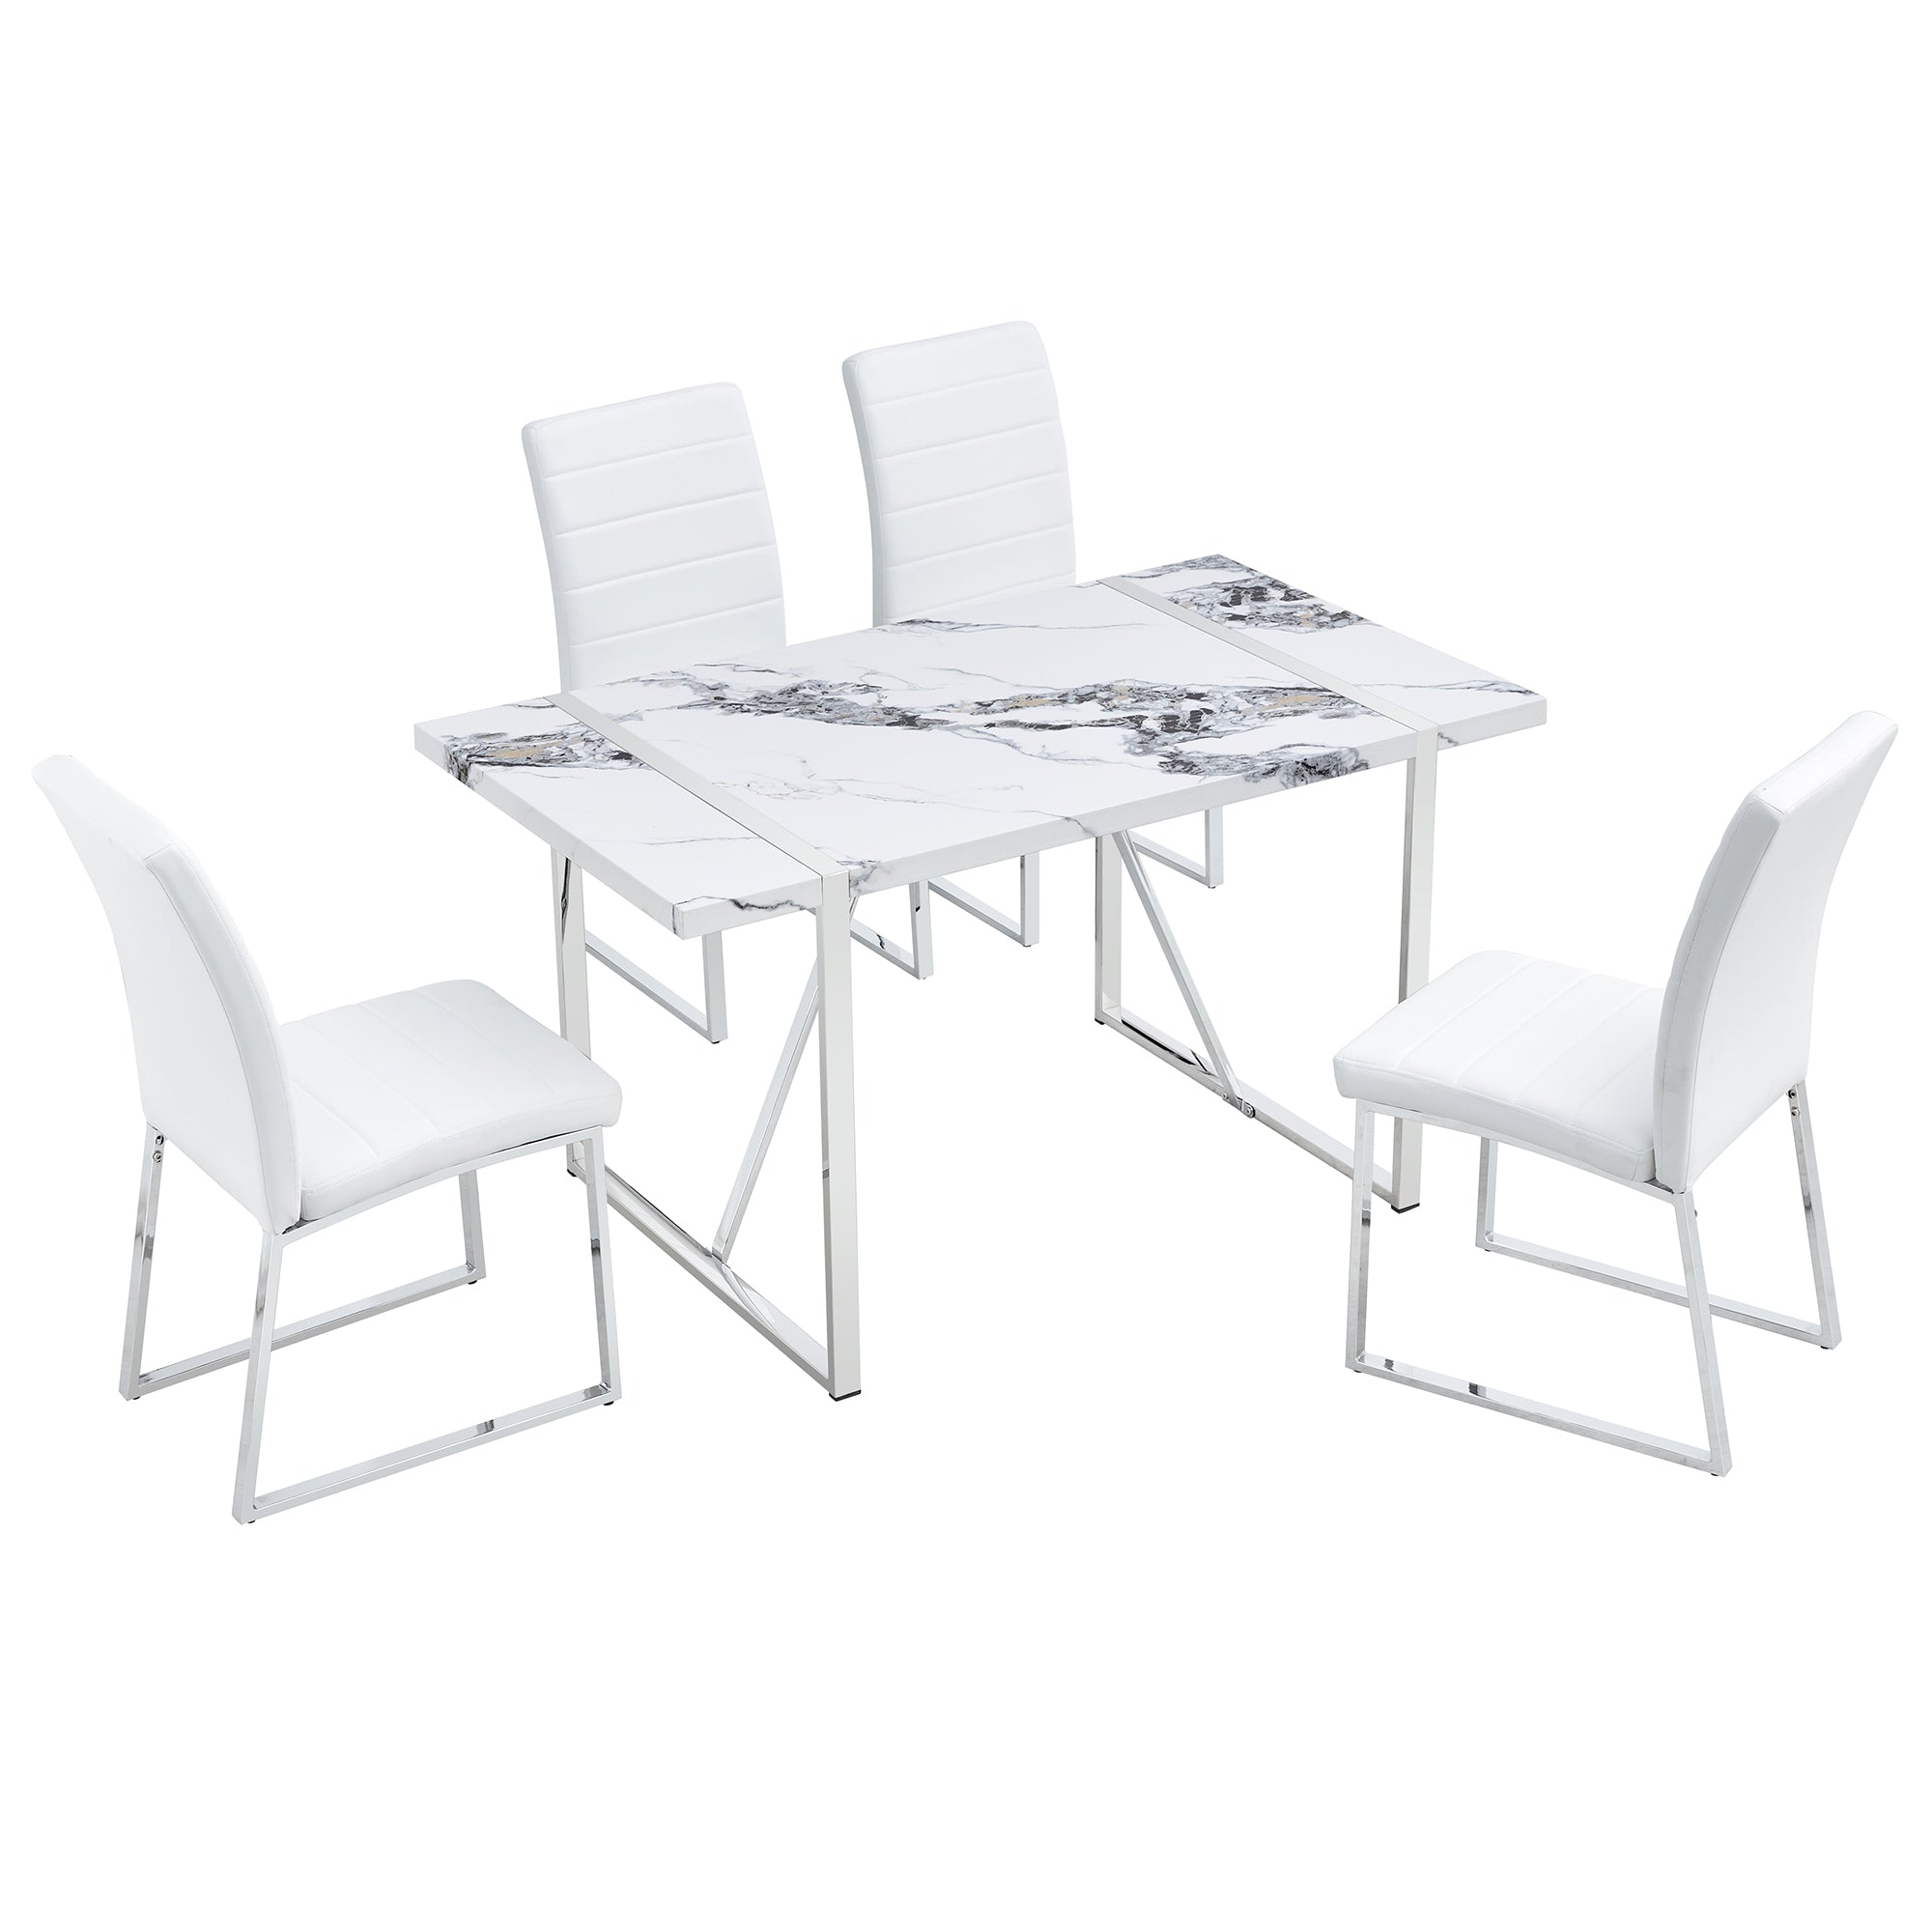 5 piece Dining Table Chairs Set, Rectangular Dining